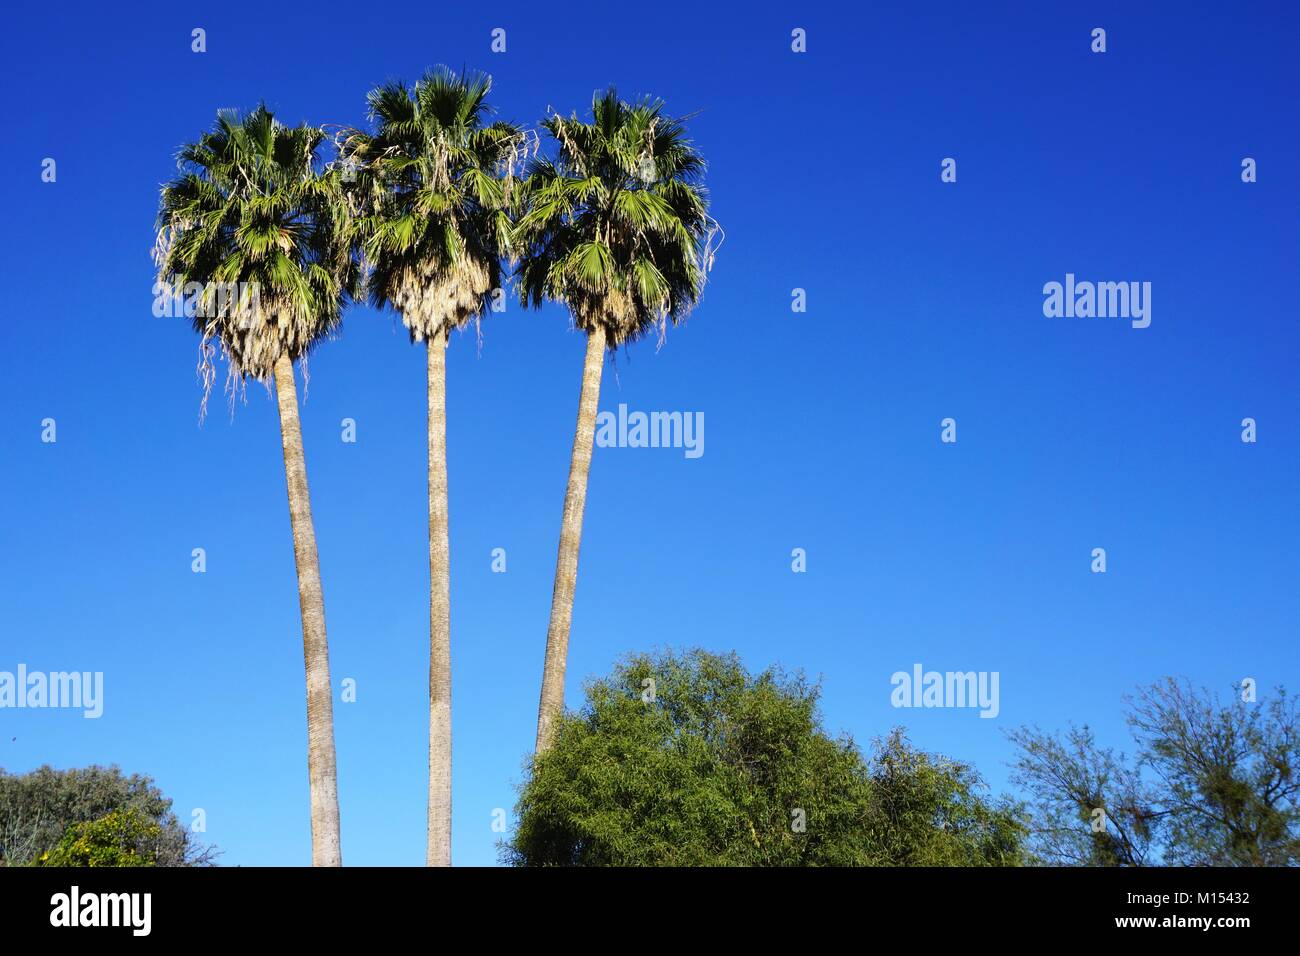 Three tall palm trees stand out in contrast against a brilliant clear blue sky on a hot sunny day in the American Southwest Stock Photo